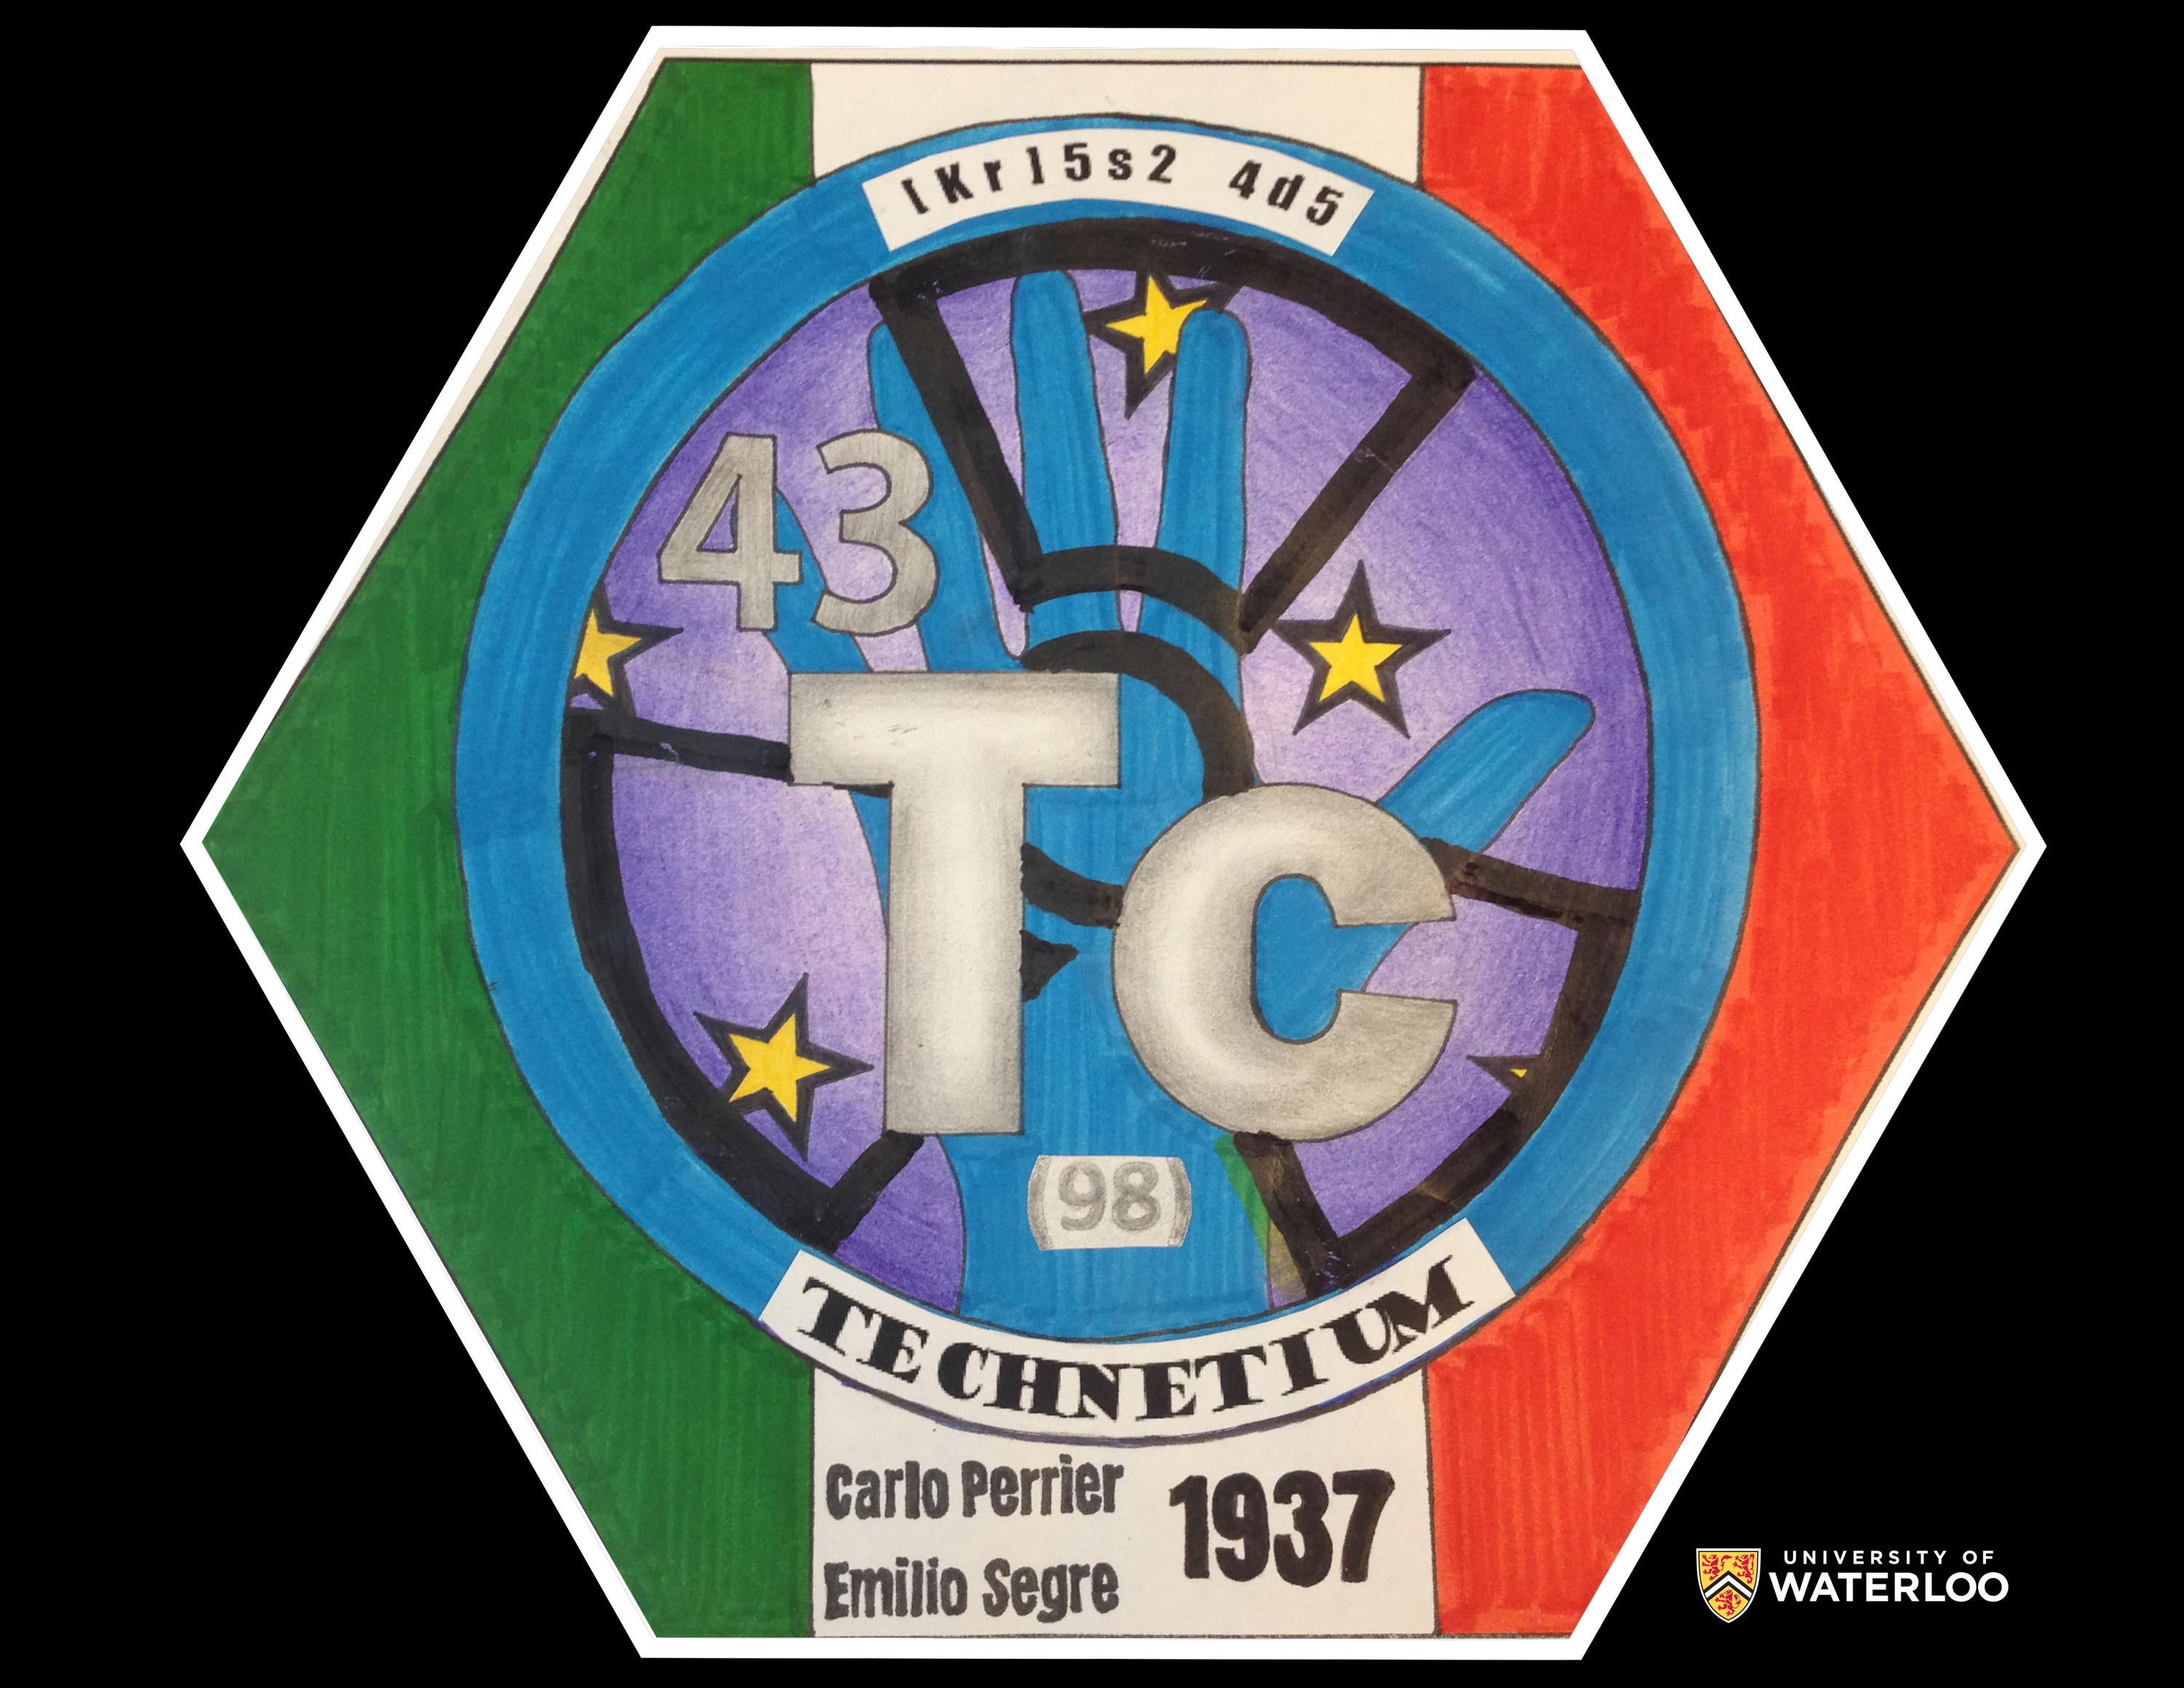 Pen and ink on paper. Background is the tricolored Italian flag. Chemical symbol “Tc”, “43” and “98” appears in centre of a circle labeled “technetium”. The circle features a radioactive symbol with five stars and a hand. Below are the names Carlo Perrier and Emilio Segre, 1937.